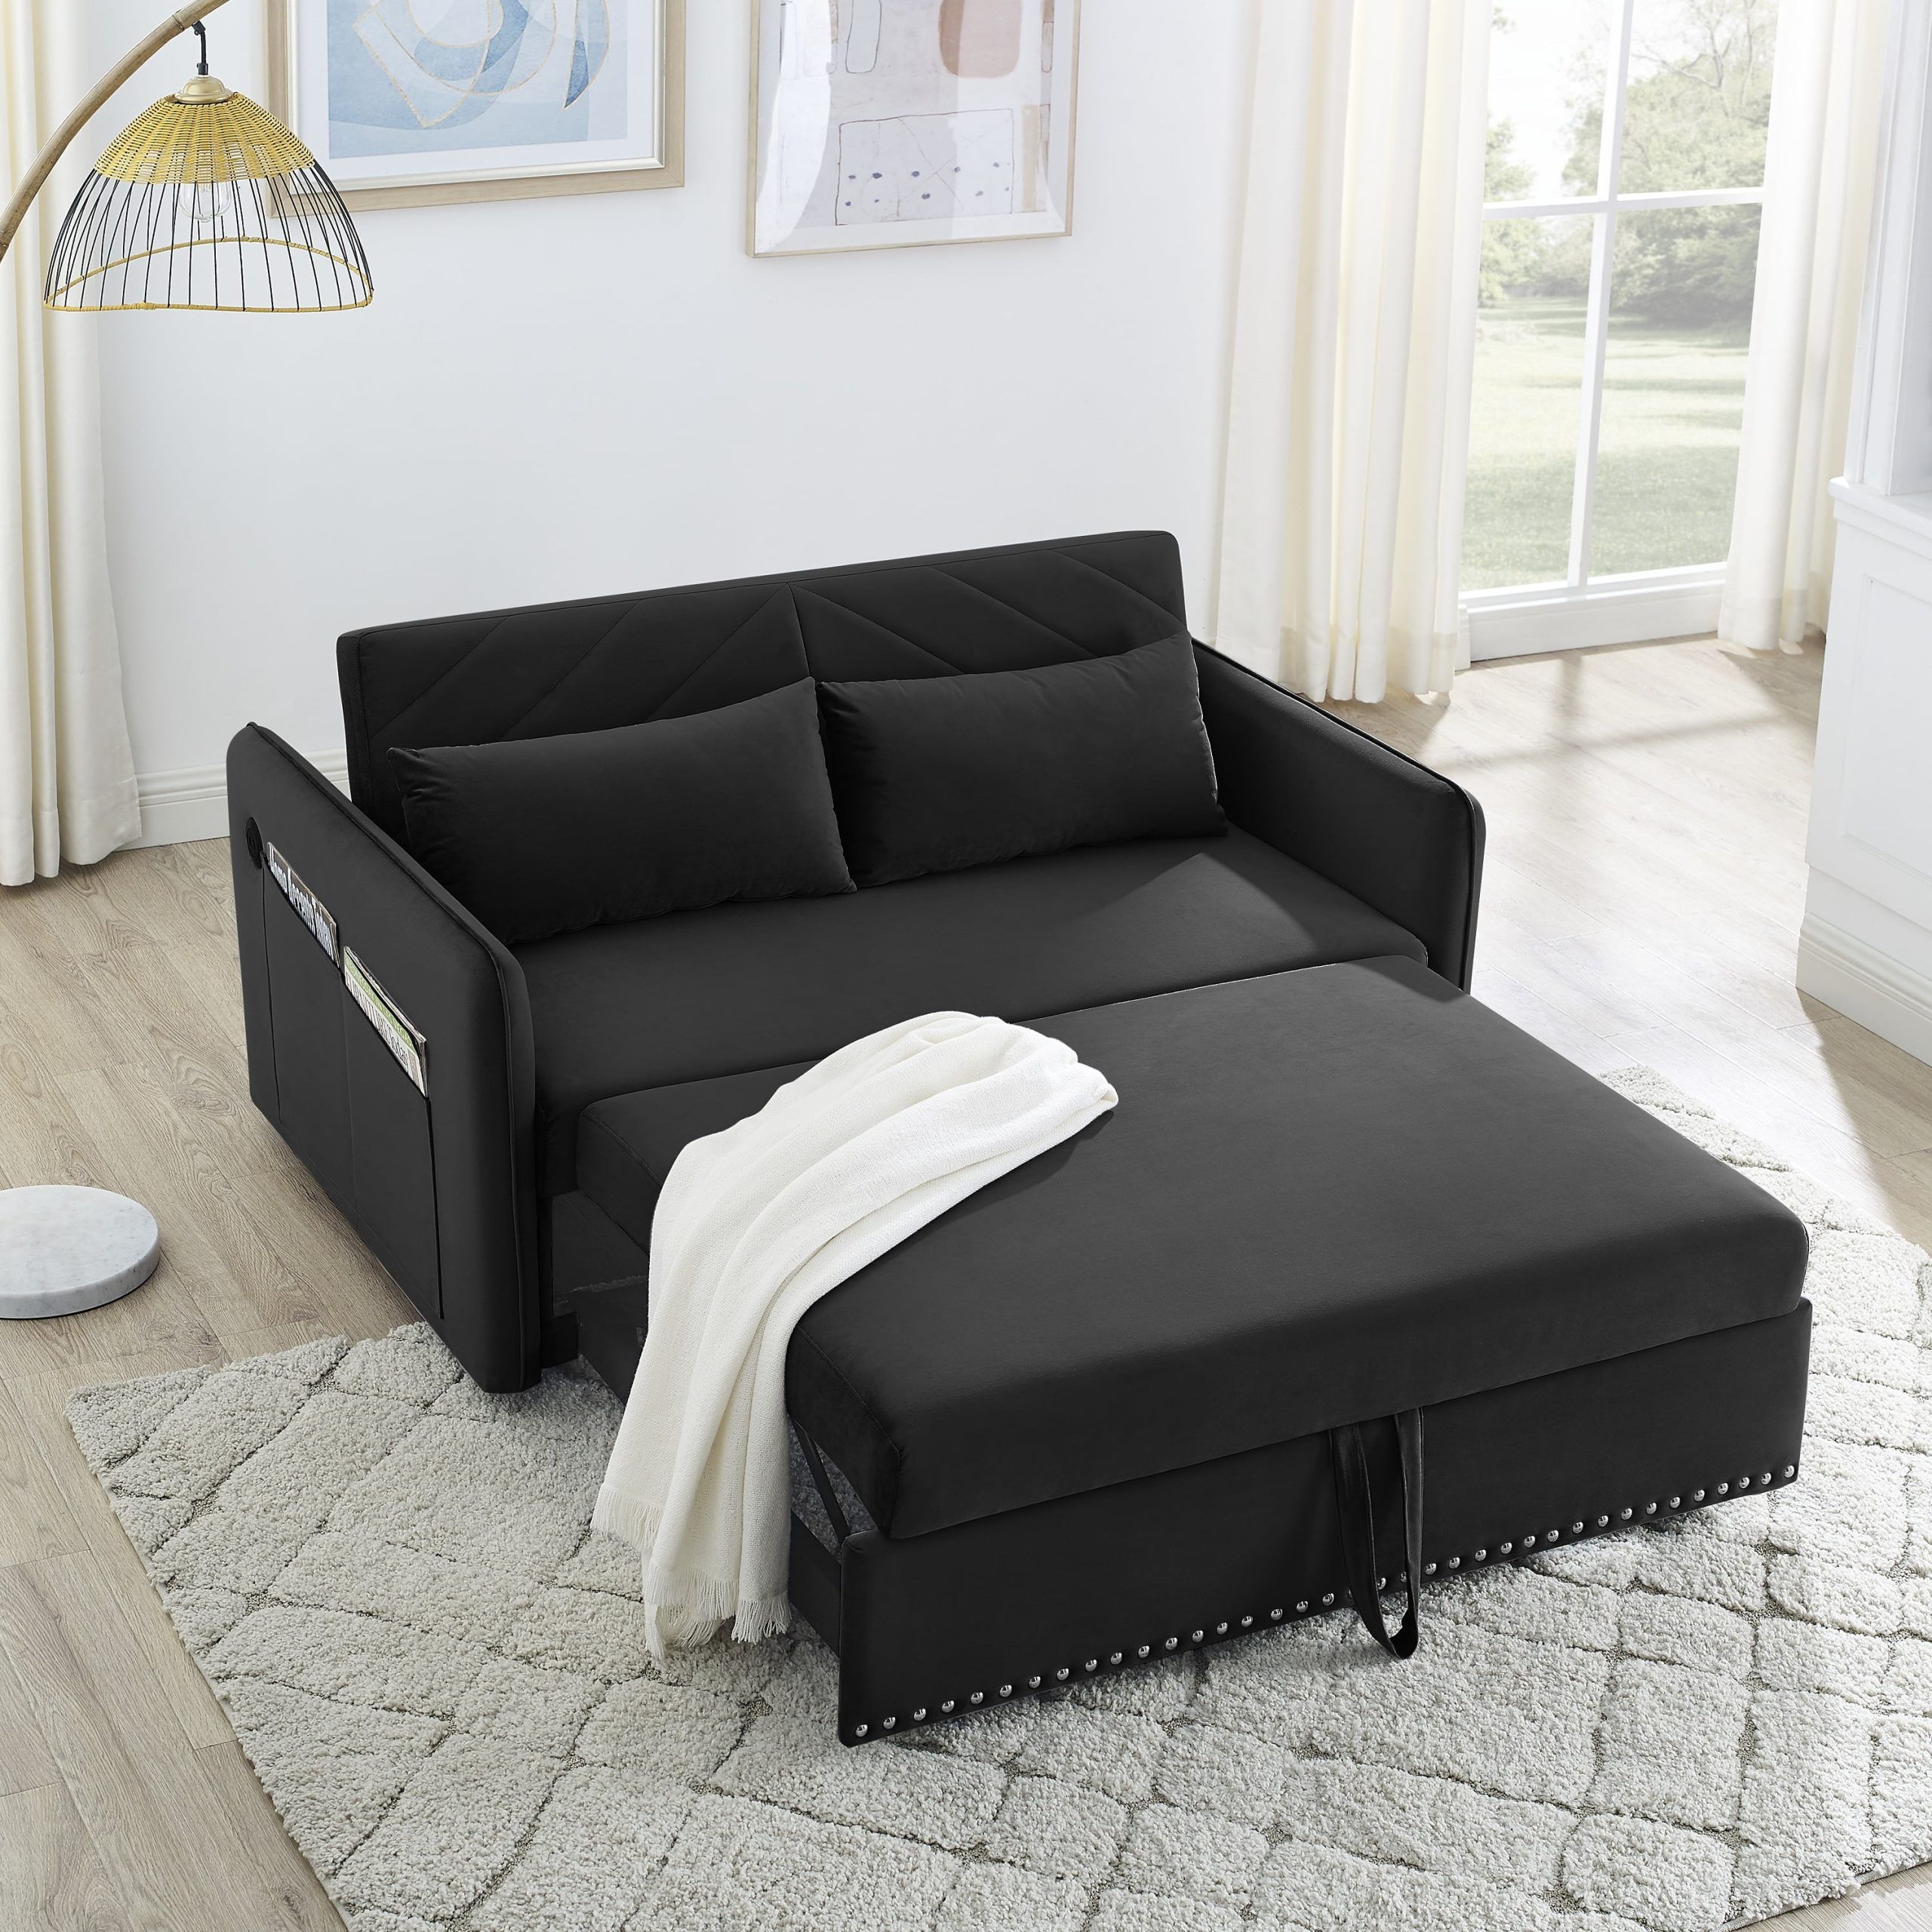 Momspeace 3 In 1 Sleeper Sofa Couch Bed With 2 Usb Ports, 55" Velvet  Convertible Loveseat With Pull Out Sofa Bed For Living Room – Black –  Walmart With Regard To 3 In 1 Gray Pull Out Sleeper Sofas (View 7 of 15)